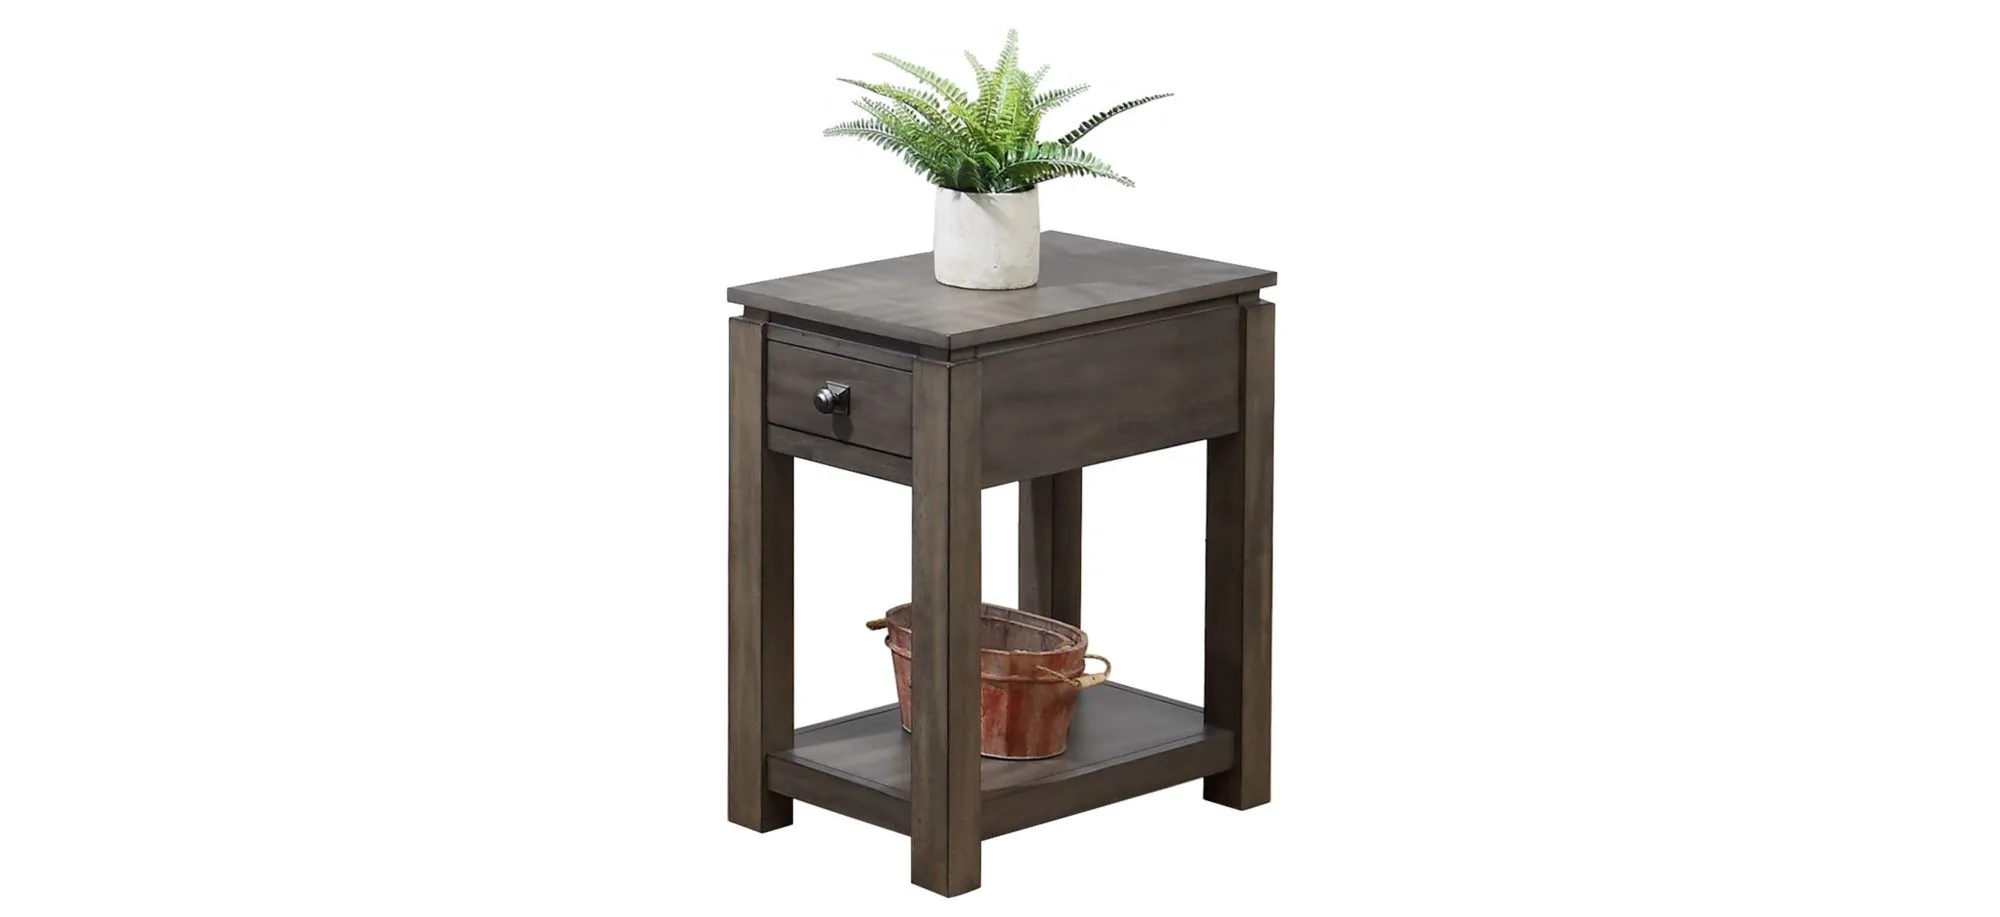 Eastlane Rectangular Narrow End Table in Weathered Gray by Sunset Trading